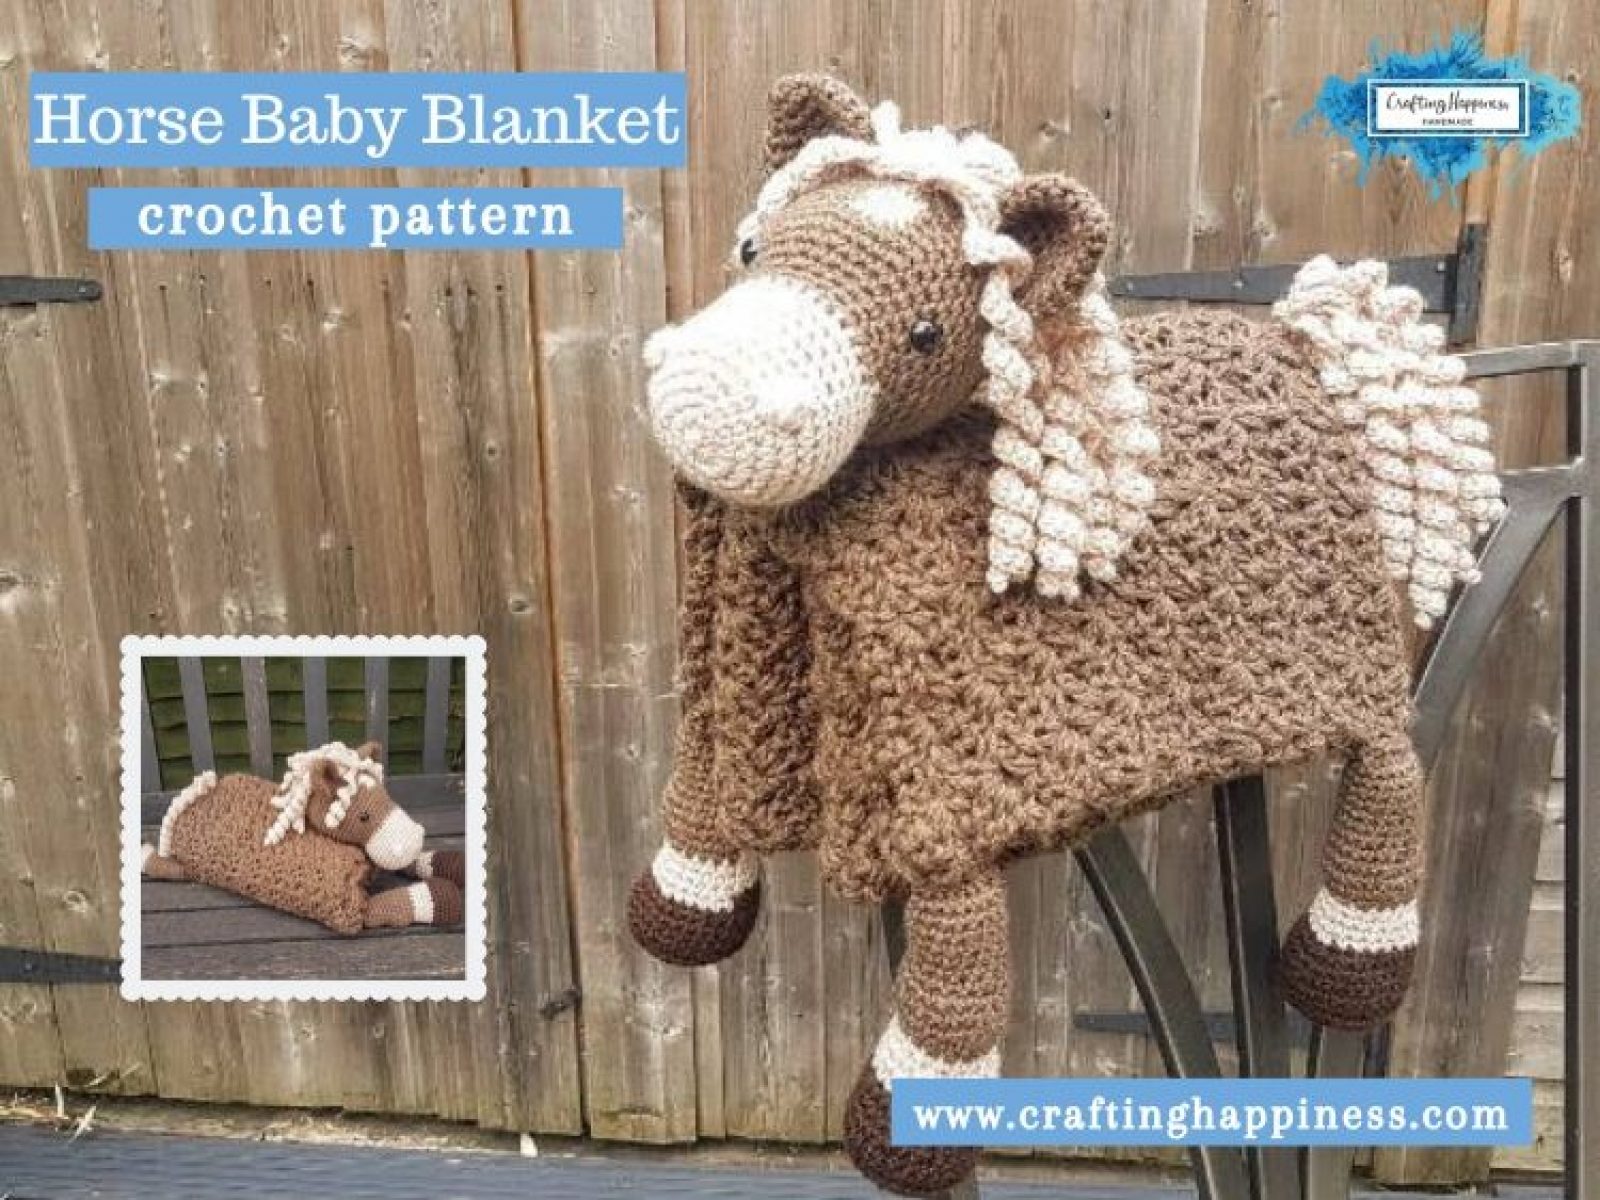 Horse Baby Blanket by Crafting Happiness FACEBOOK POSTER